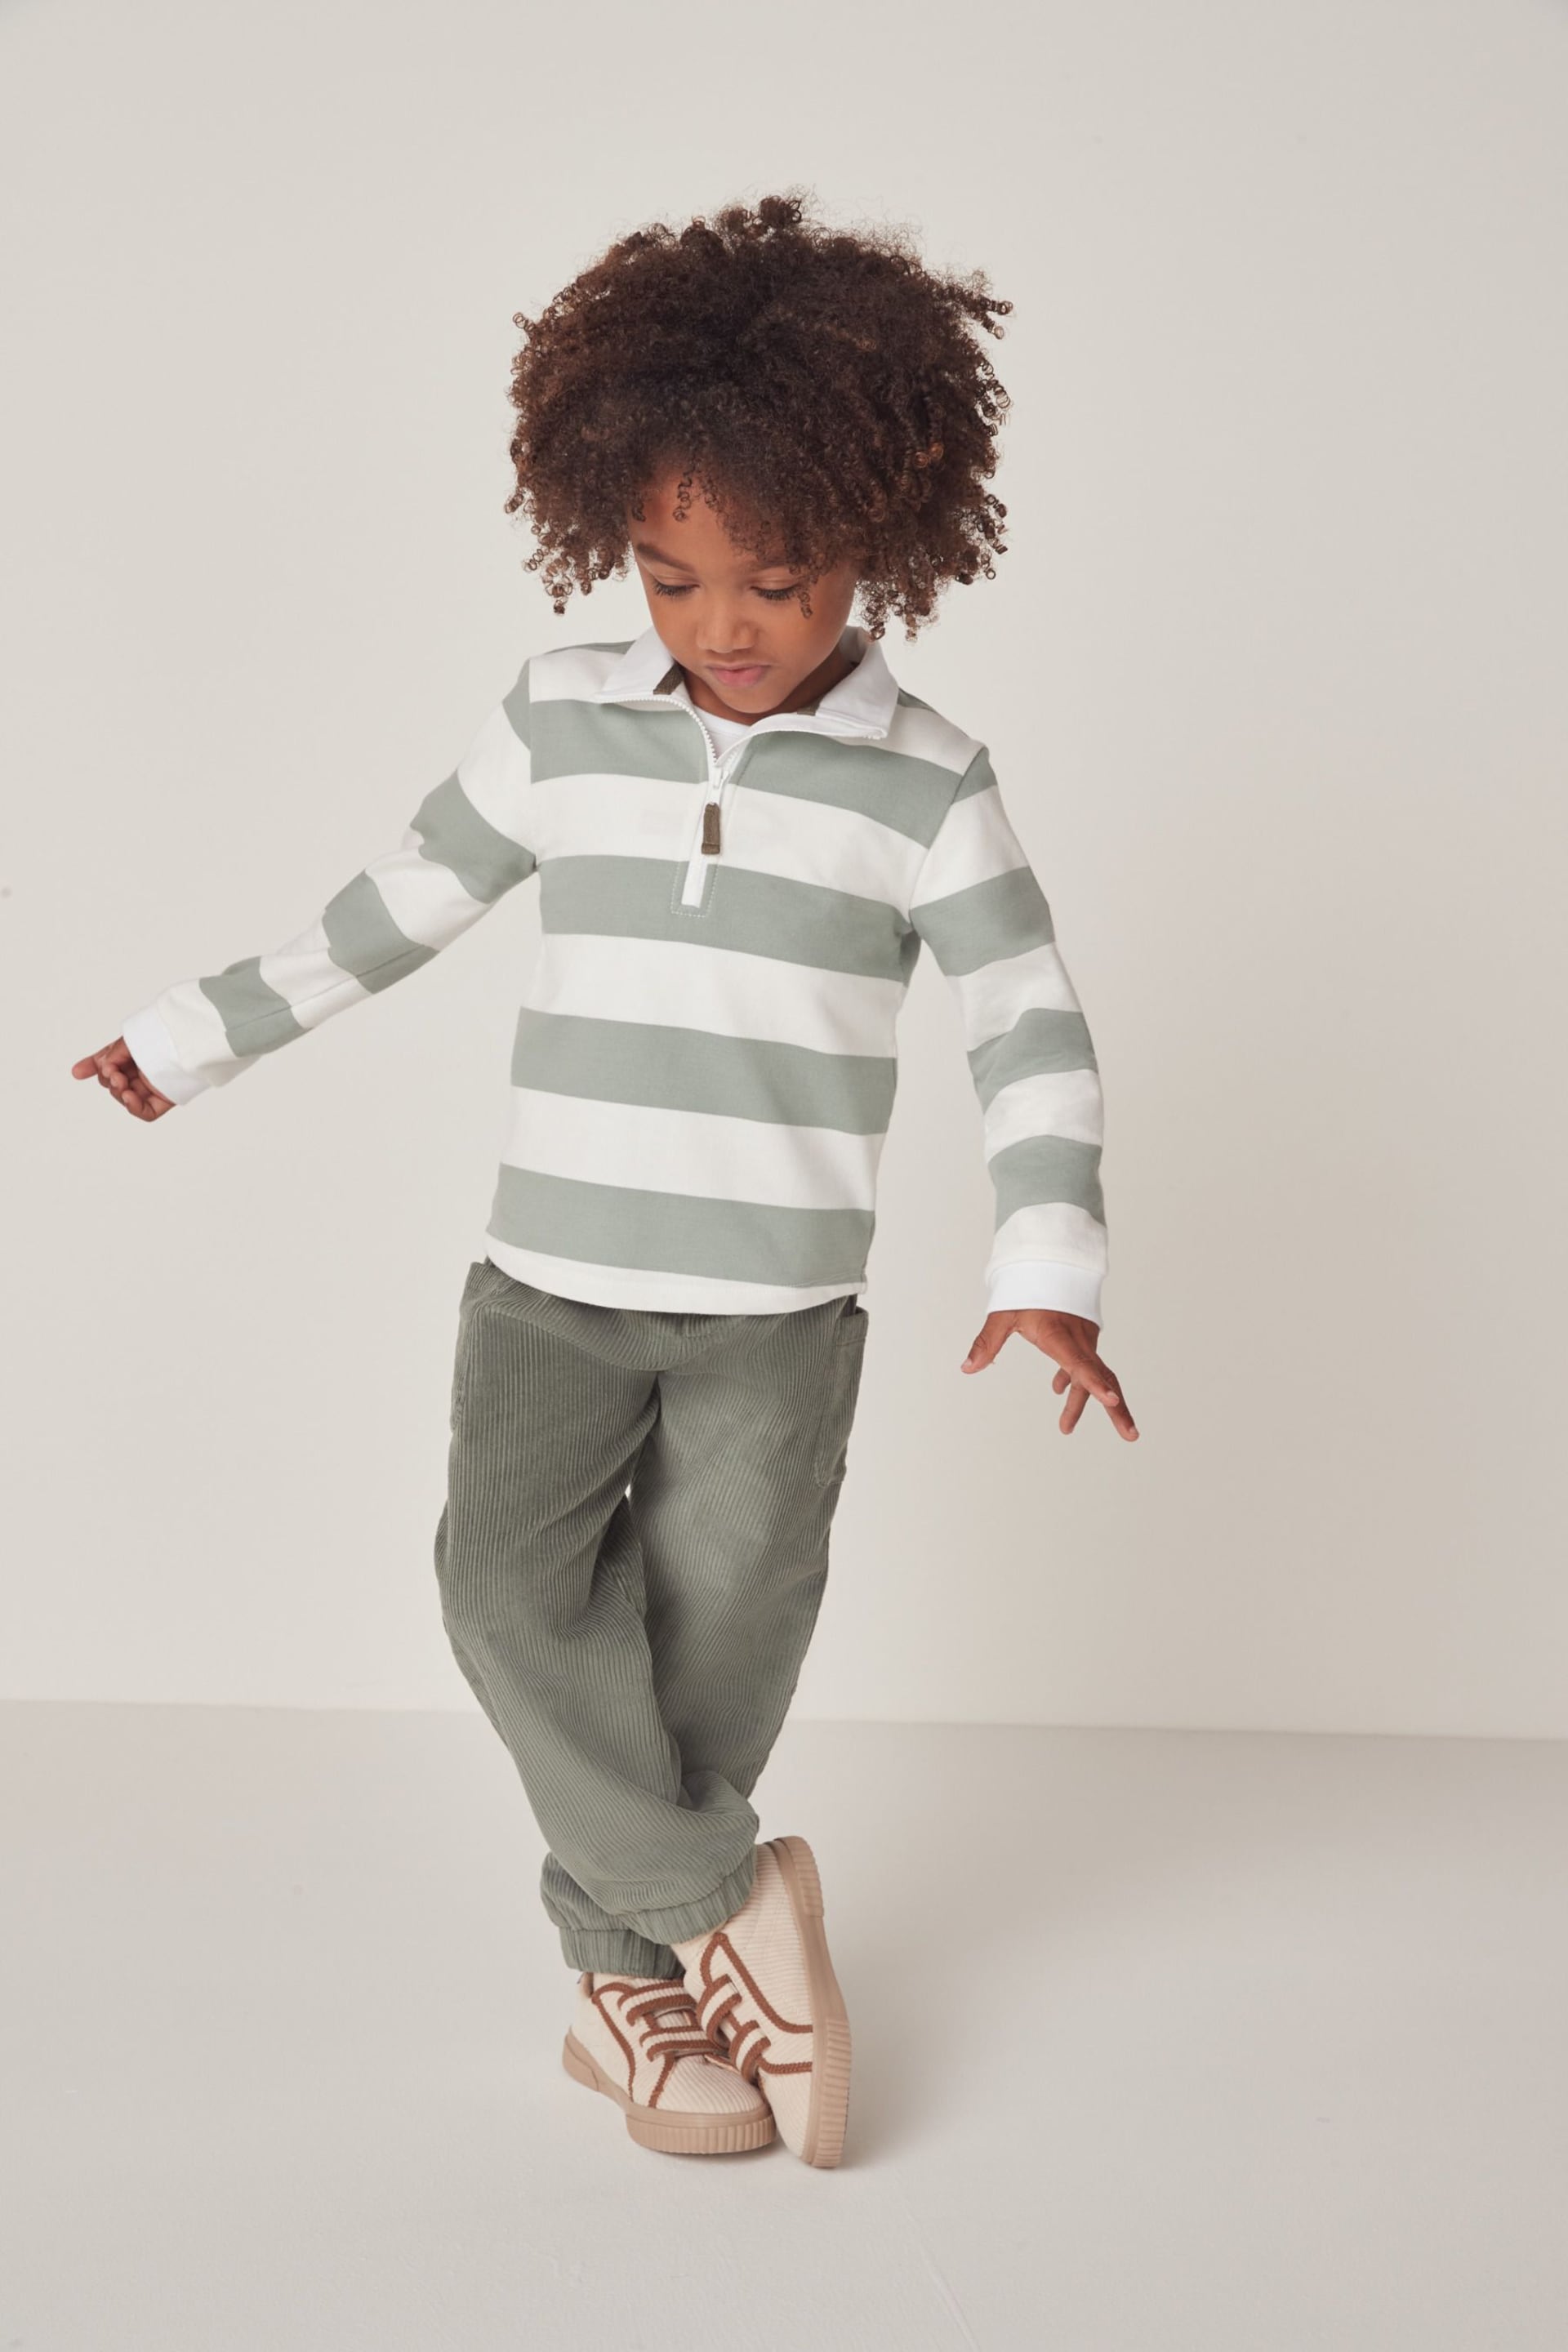 The White Company Green Cotton Rugby Shirt & Cord Trouser Set - Image 1 of 10